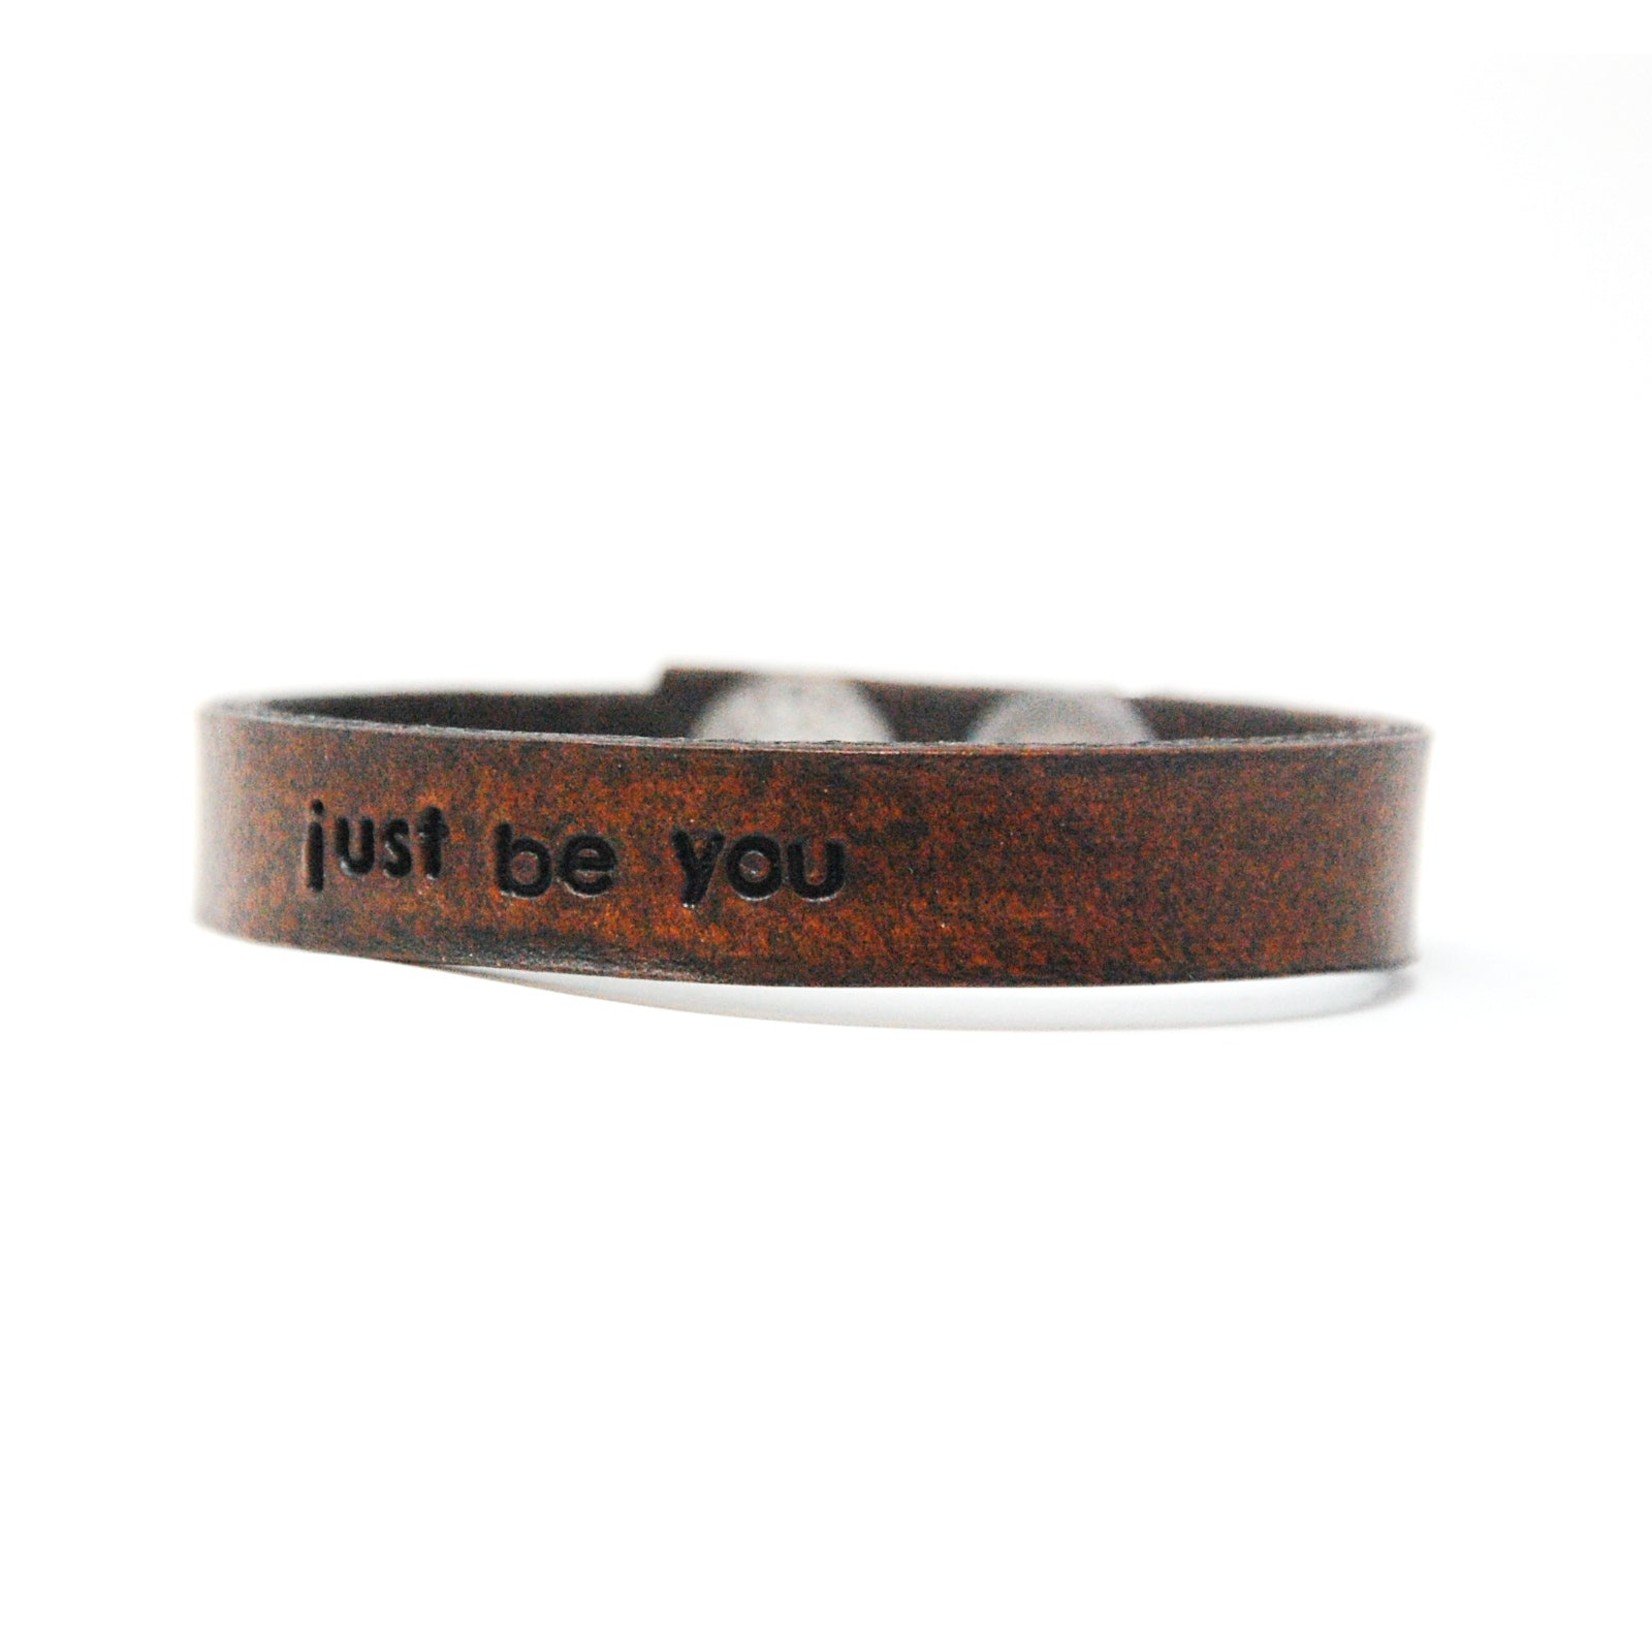 Fearless hART Stamped Leather Bracelet